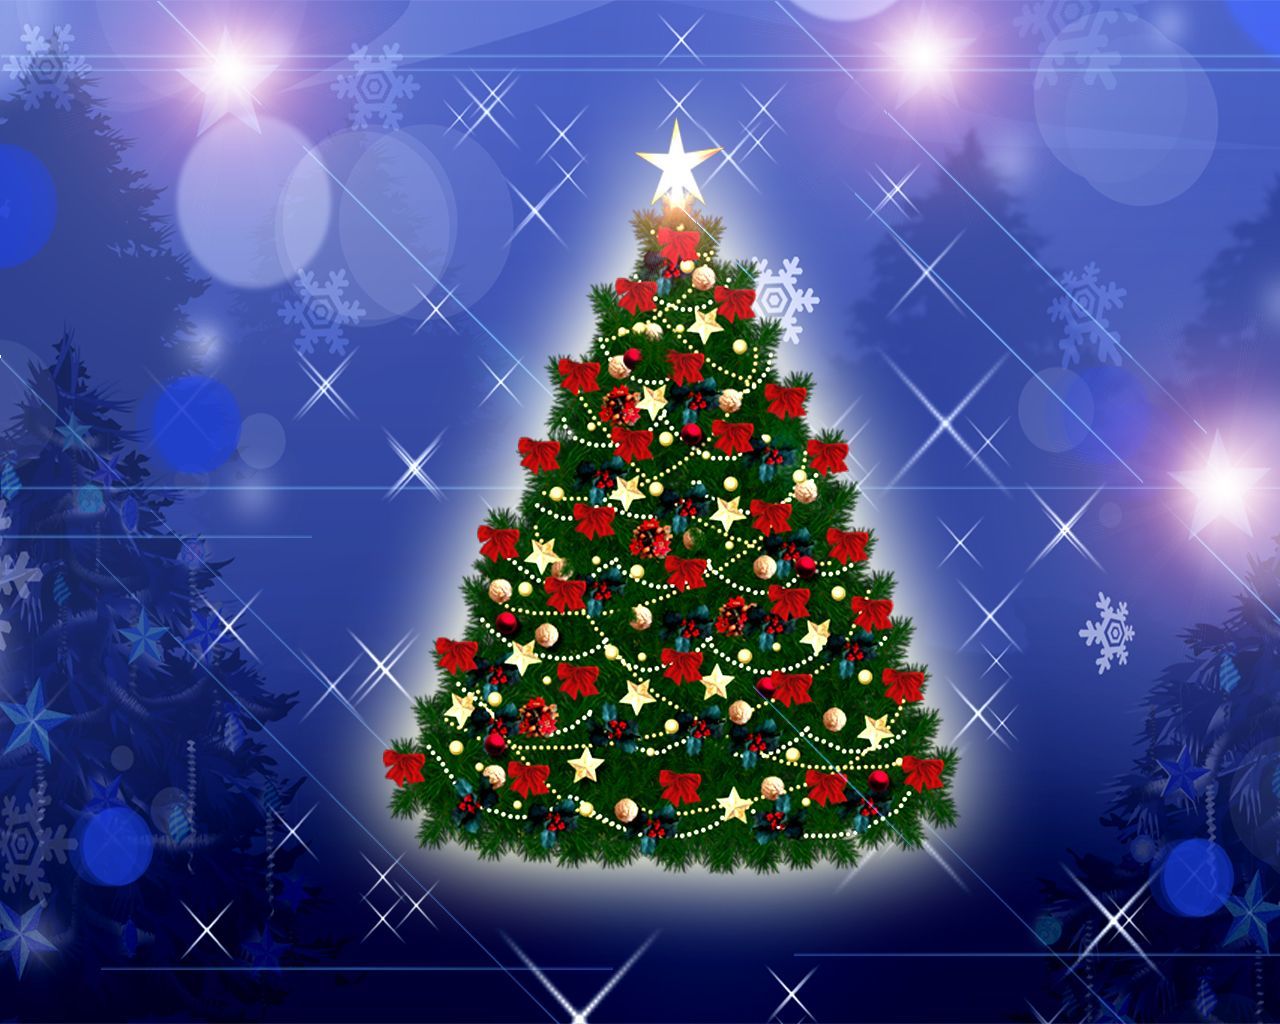 Wallpaper and Image and Photo: 3D christmas tree Animated. Christmas tree wallpaper, Christmas wallpaper free, Christmas tree image